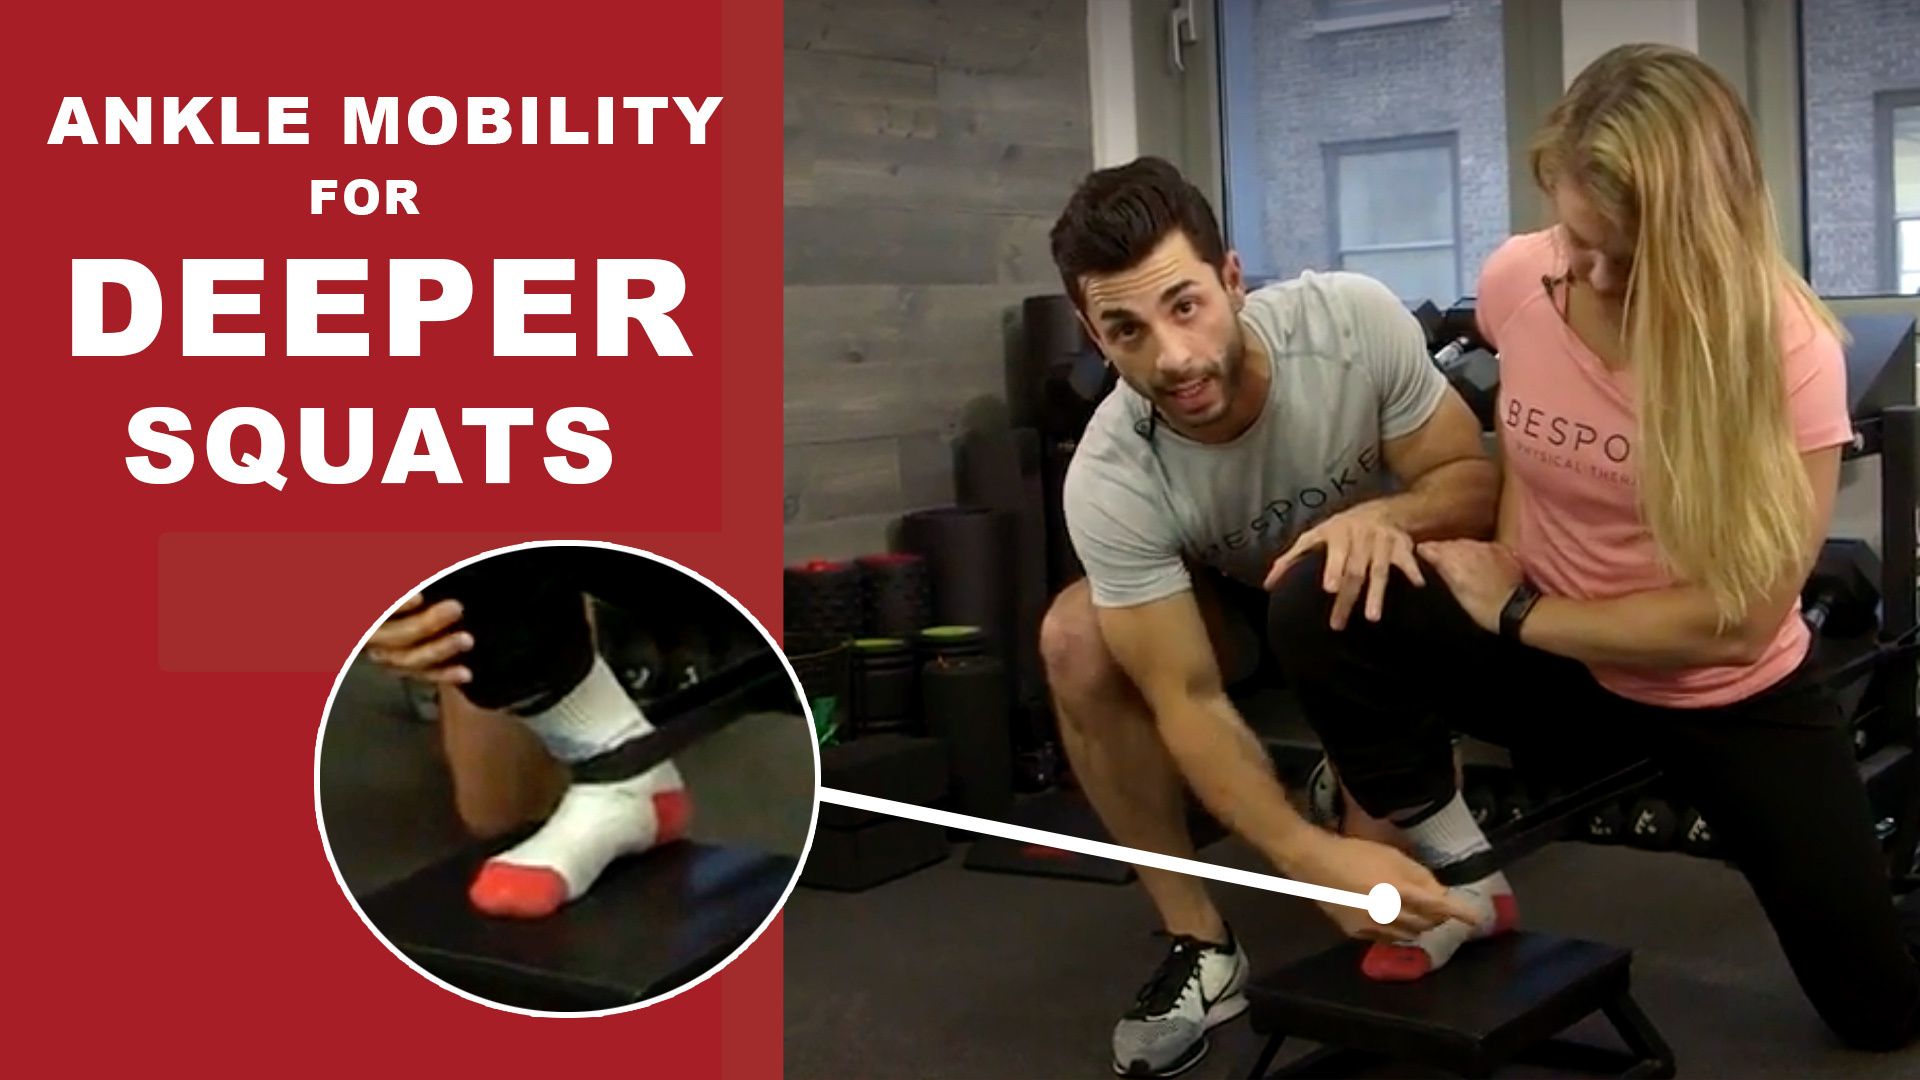 3 Highly Effective Exercises for Ankle Mobility & Dorsiflexion